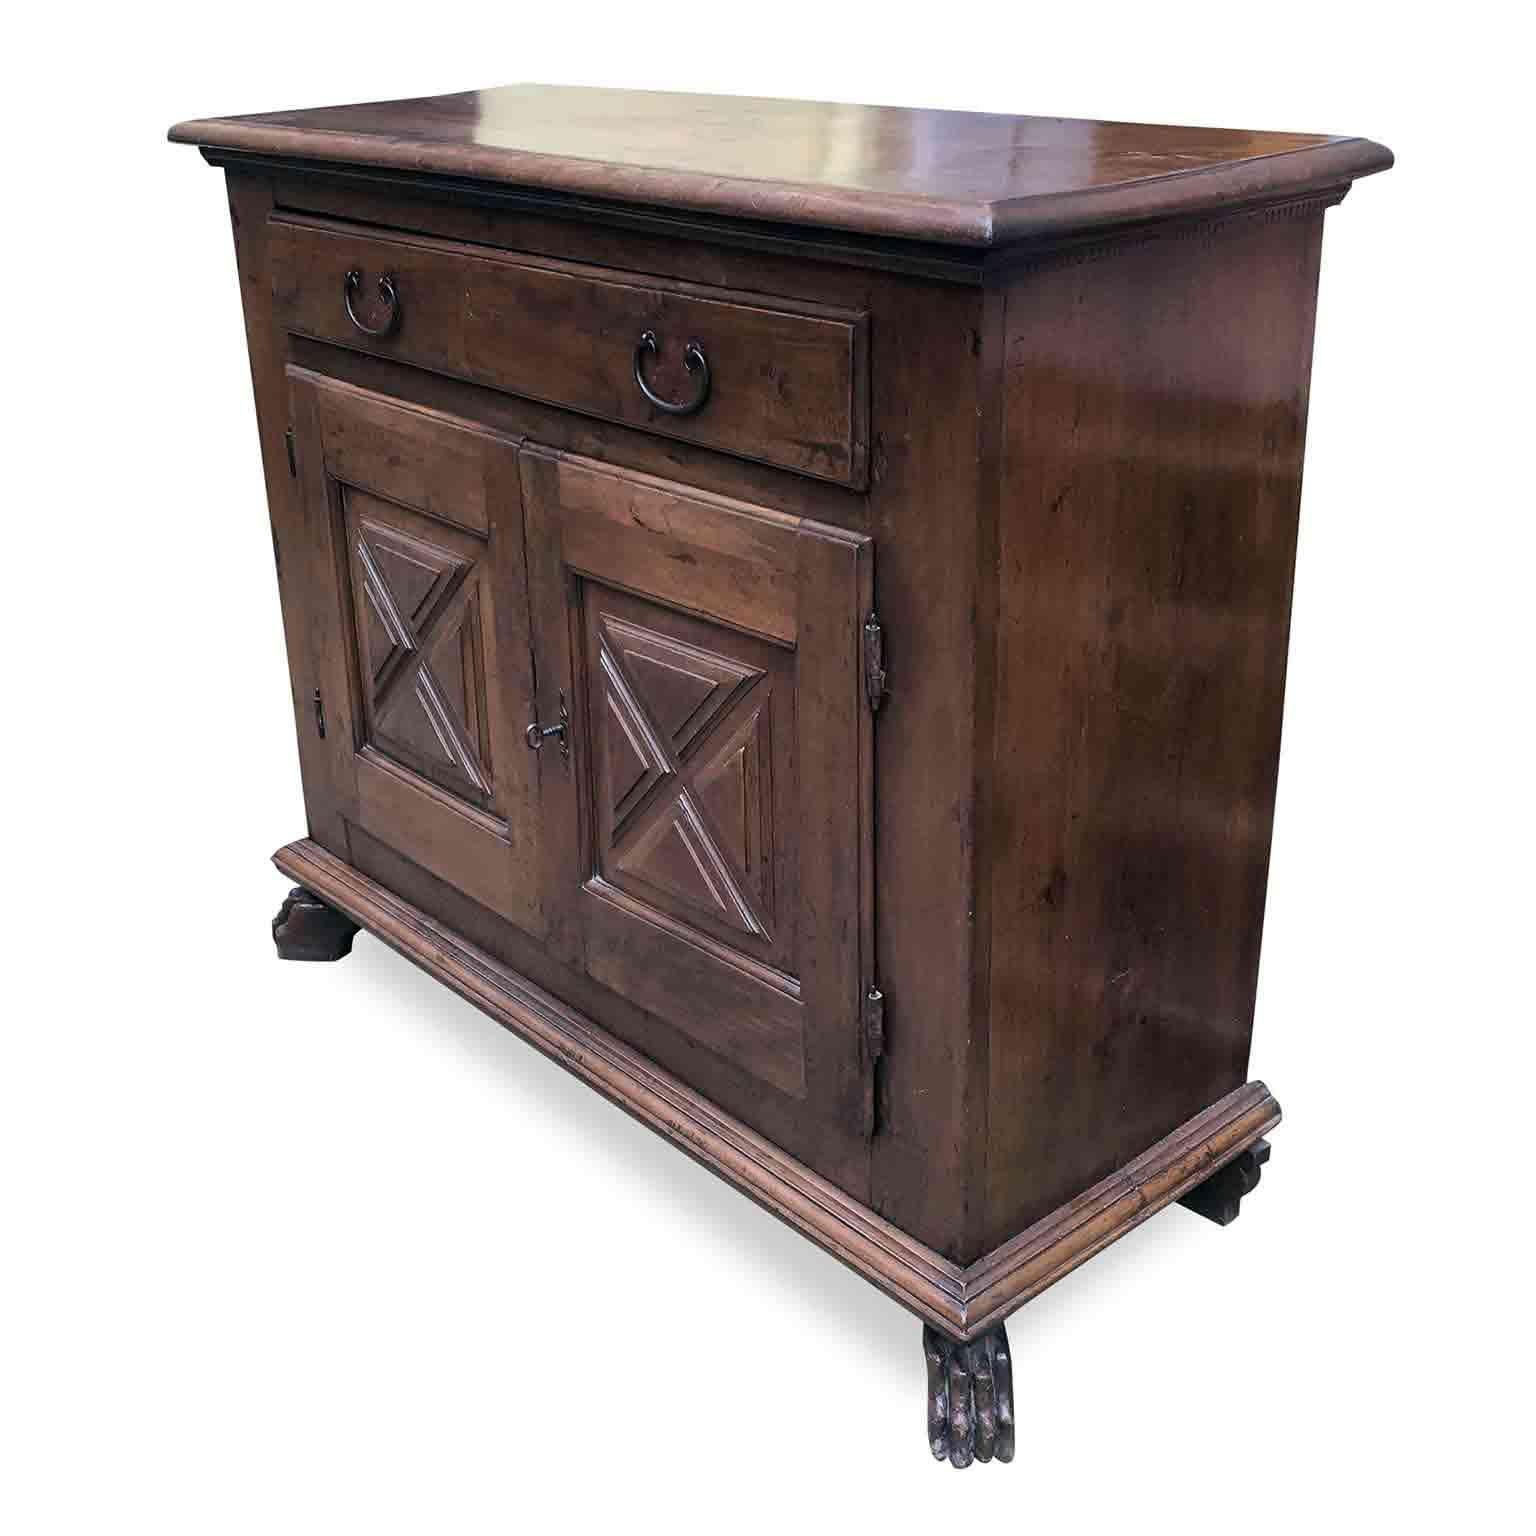 From Italy an antique solid walnut two-door sideboard dating back to 17th century, it is a Baroque Italian taste hand carved walnut credenza or buffet coming from a private collection in Milan, in good age related condition with a beautiful warm